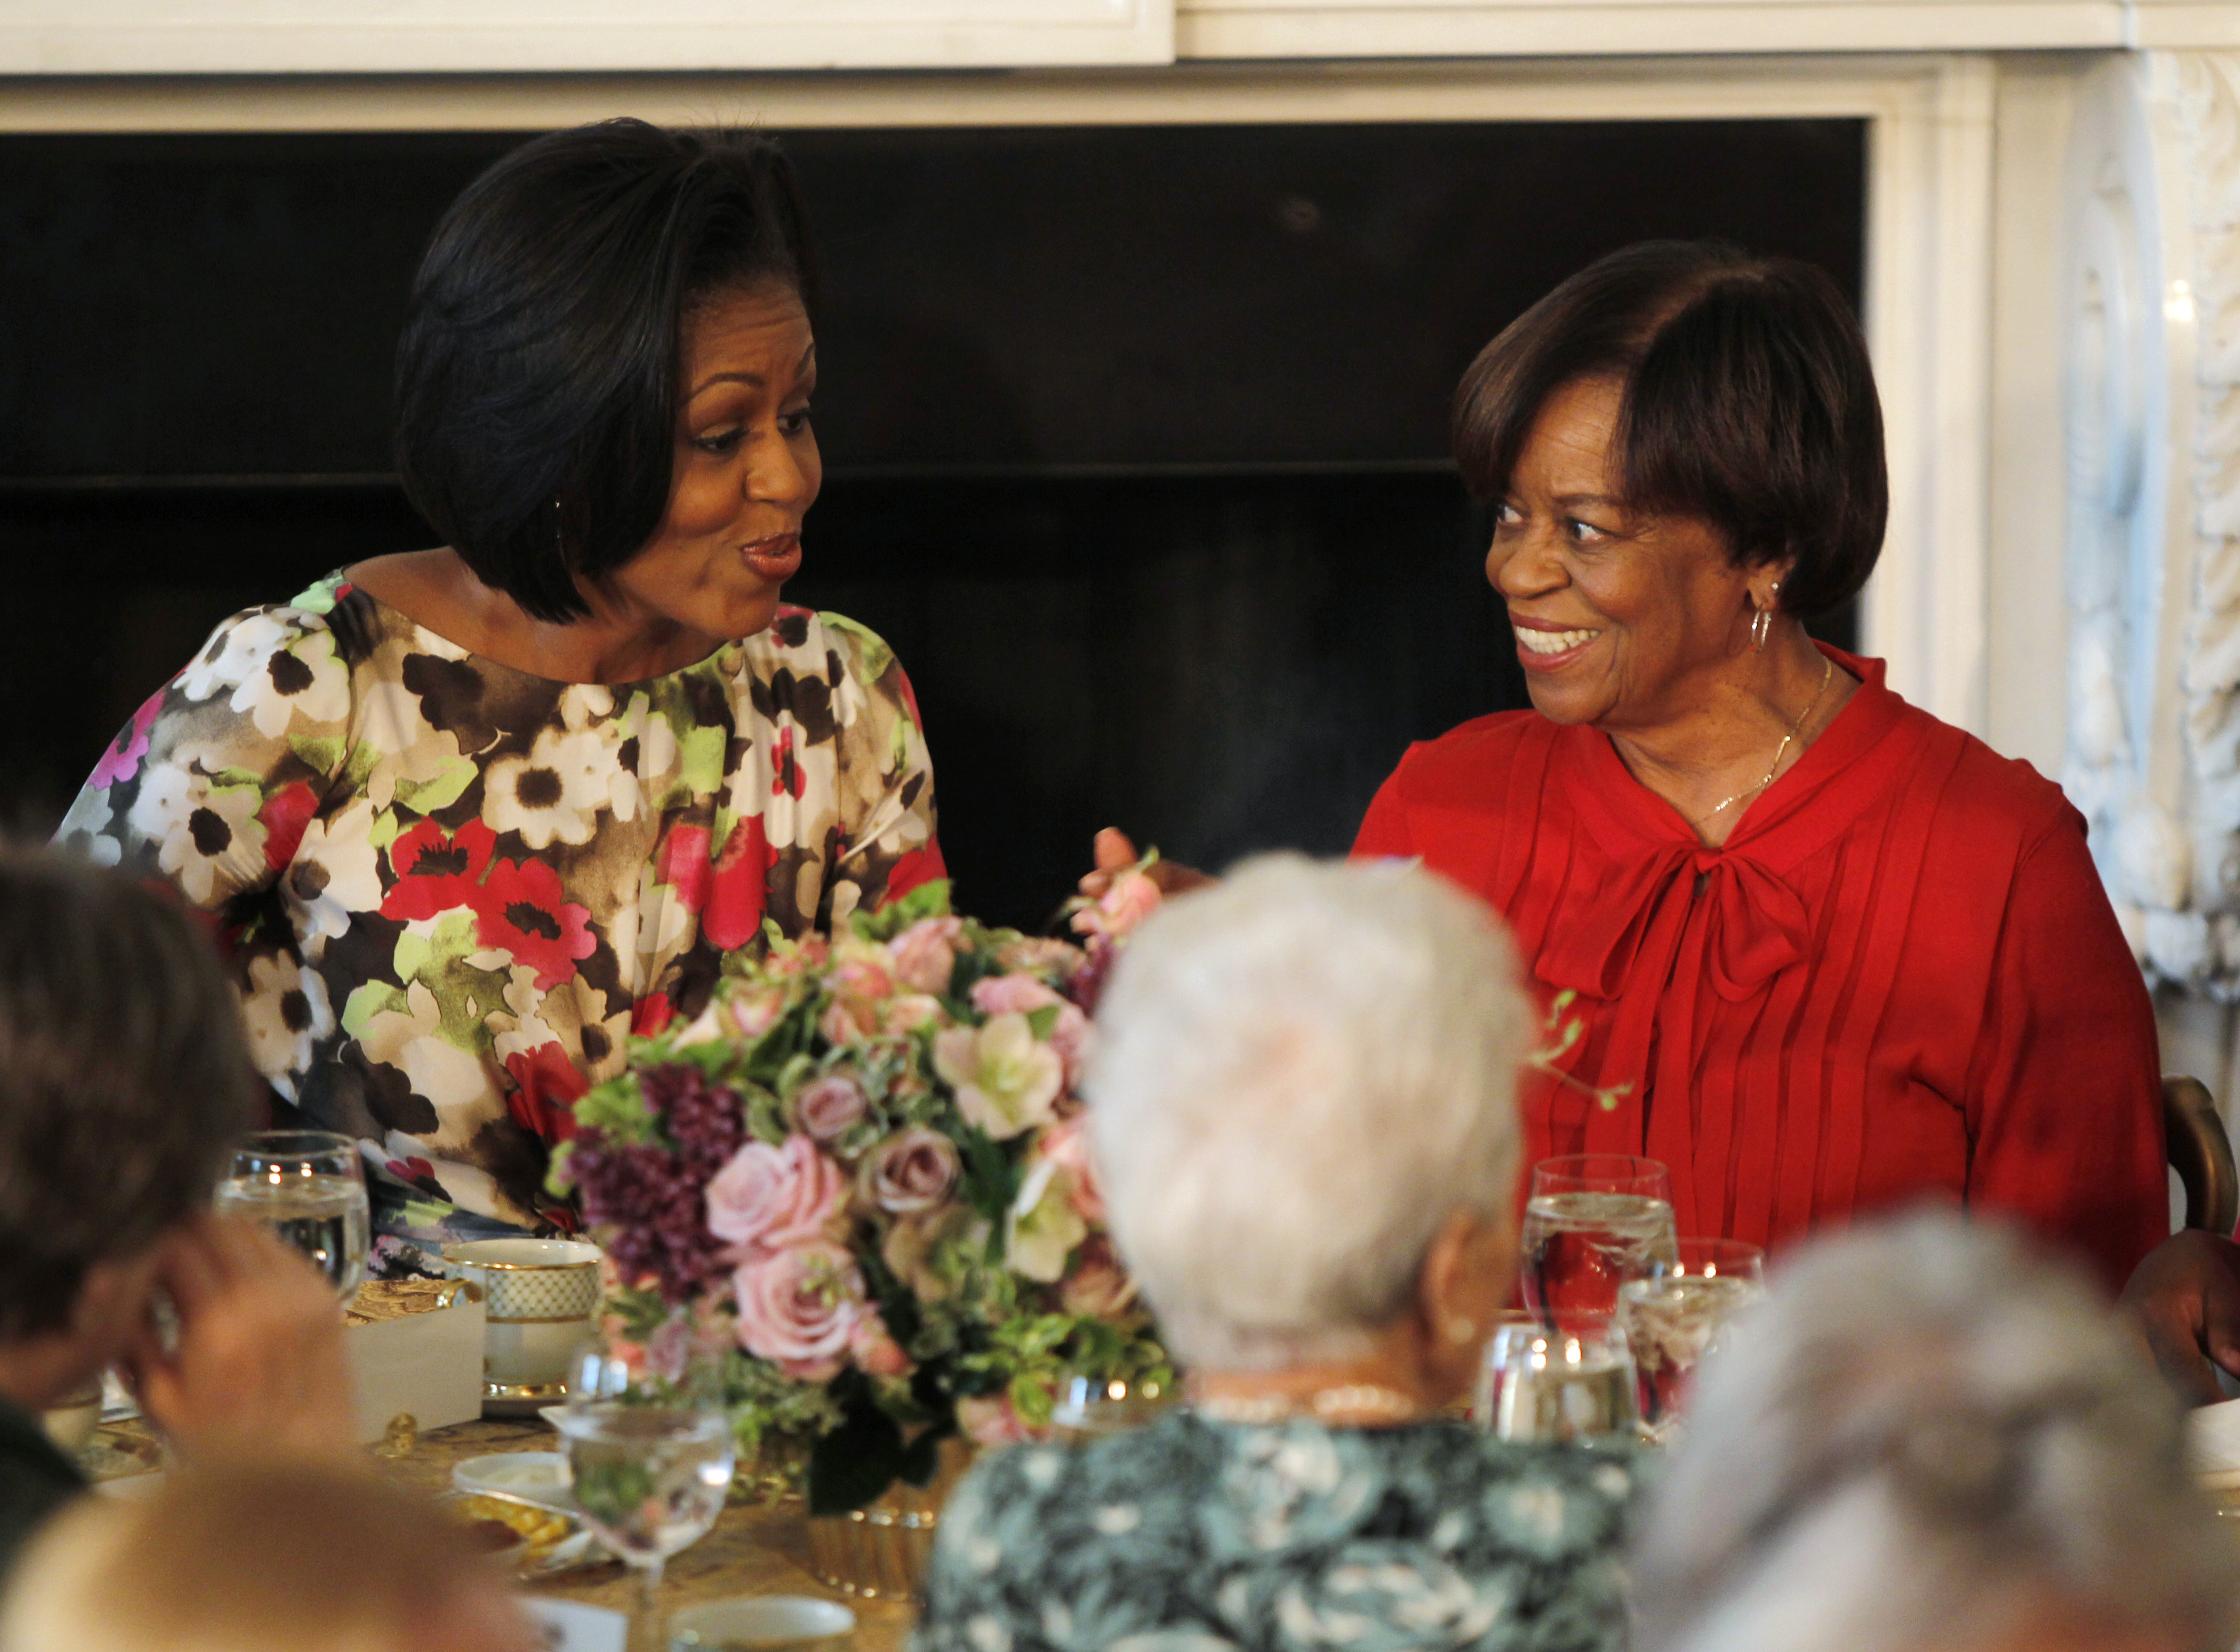 US first lady Obama sits alongside her mother Robinson as she hosts a Mother's Day event in Washington